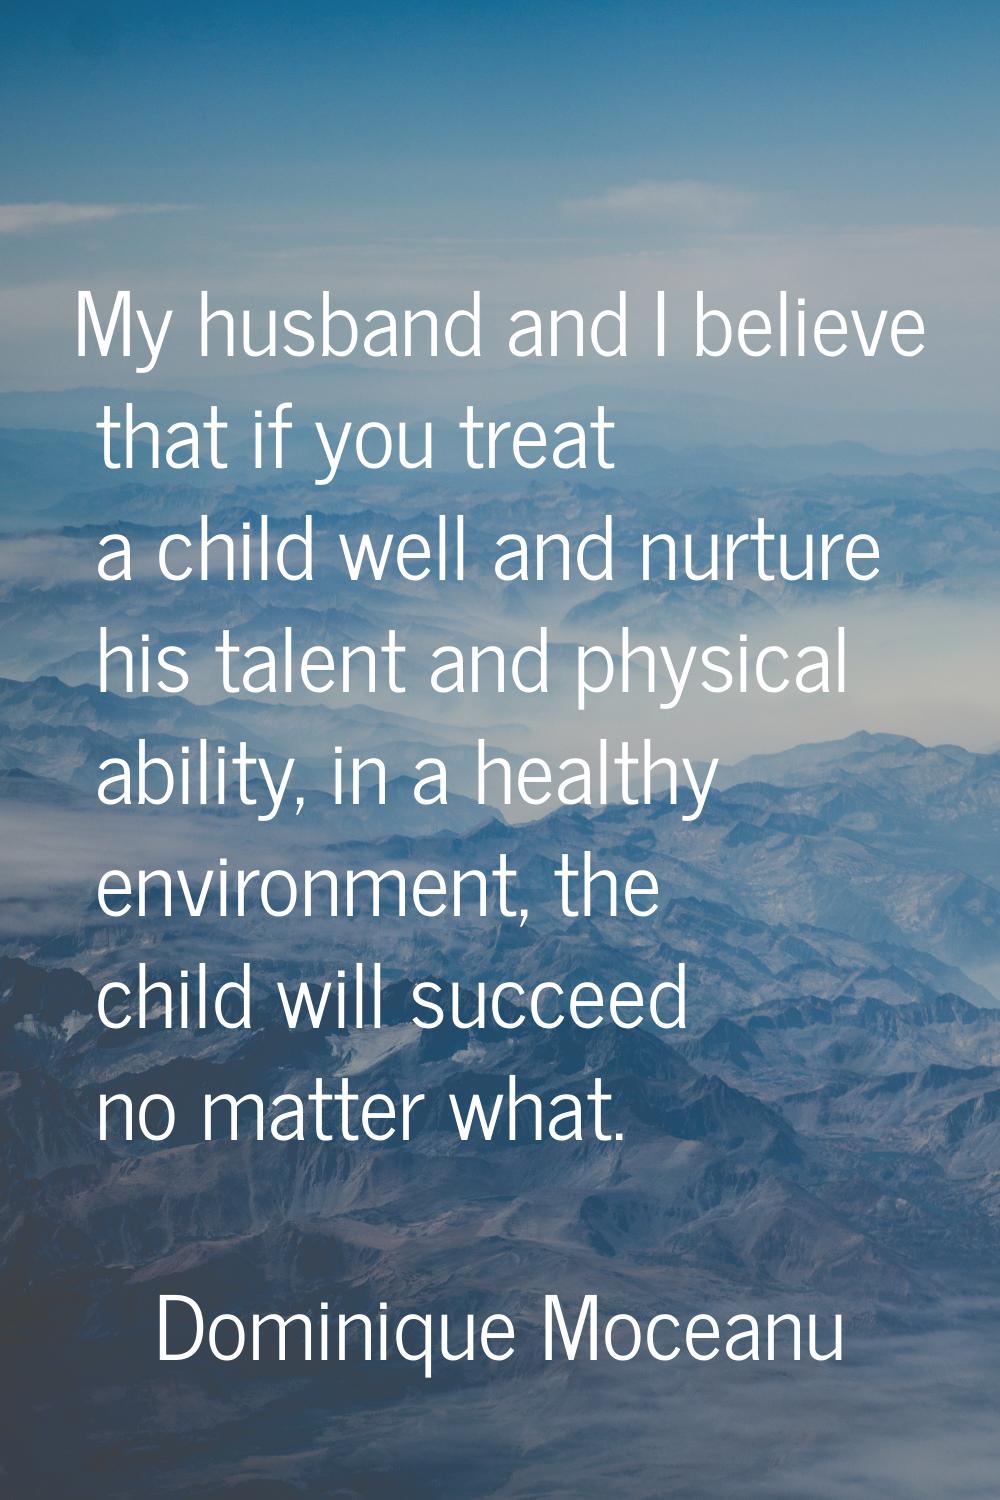 My husband and I believe that if you treat a child well and nurture his talent and physical ability